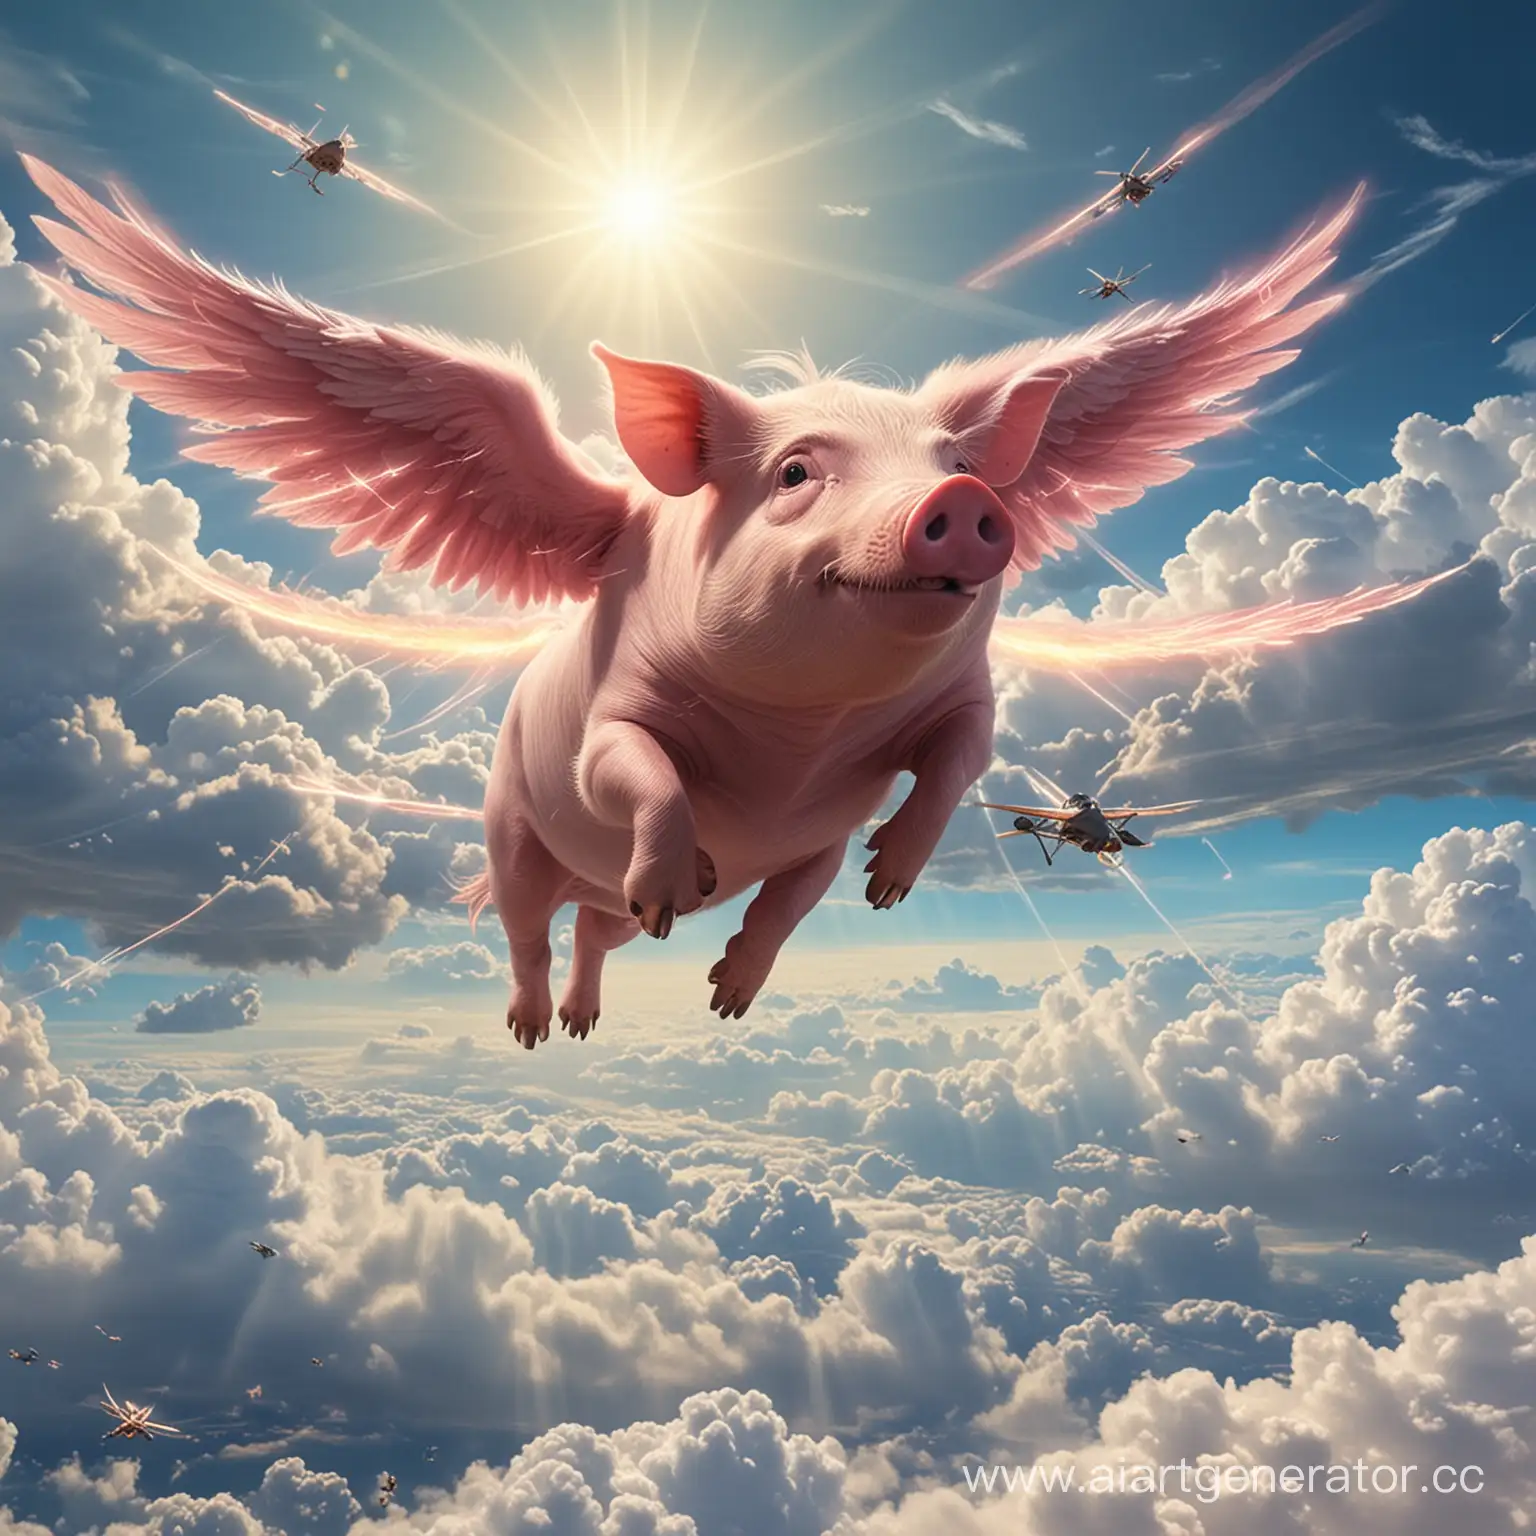 Flying-Pig-with-Laser-Eyes-Soaring-Through-Clouds